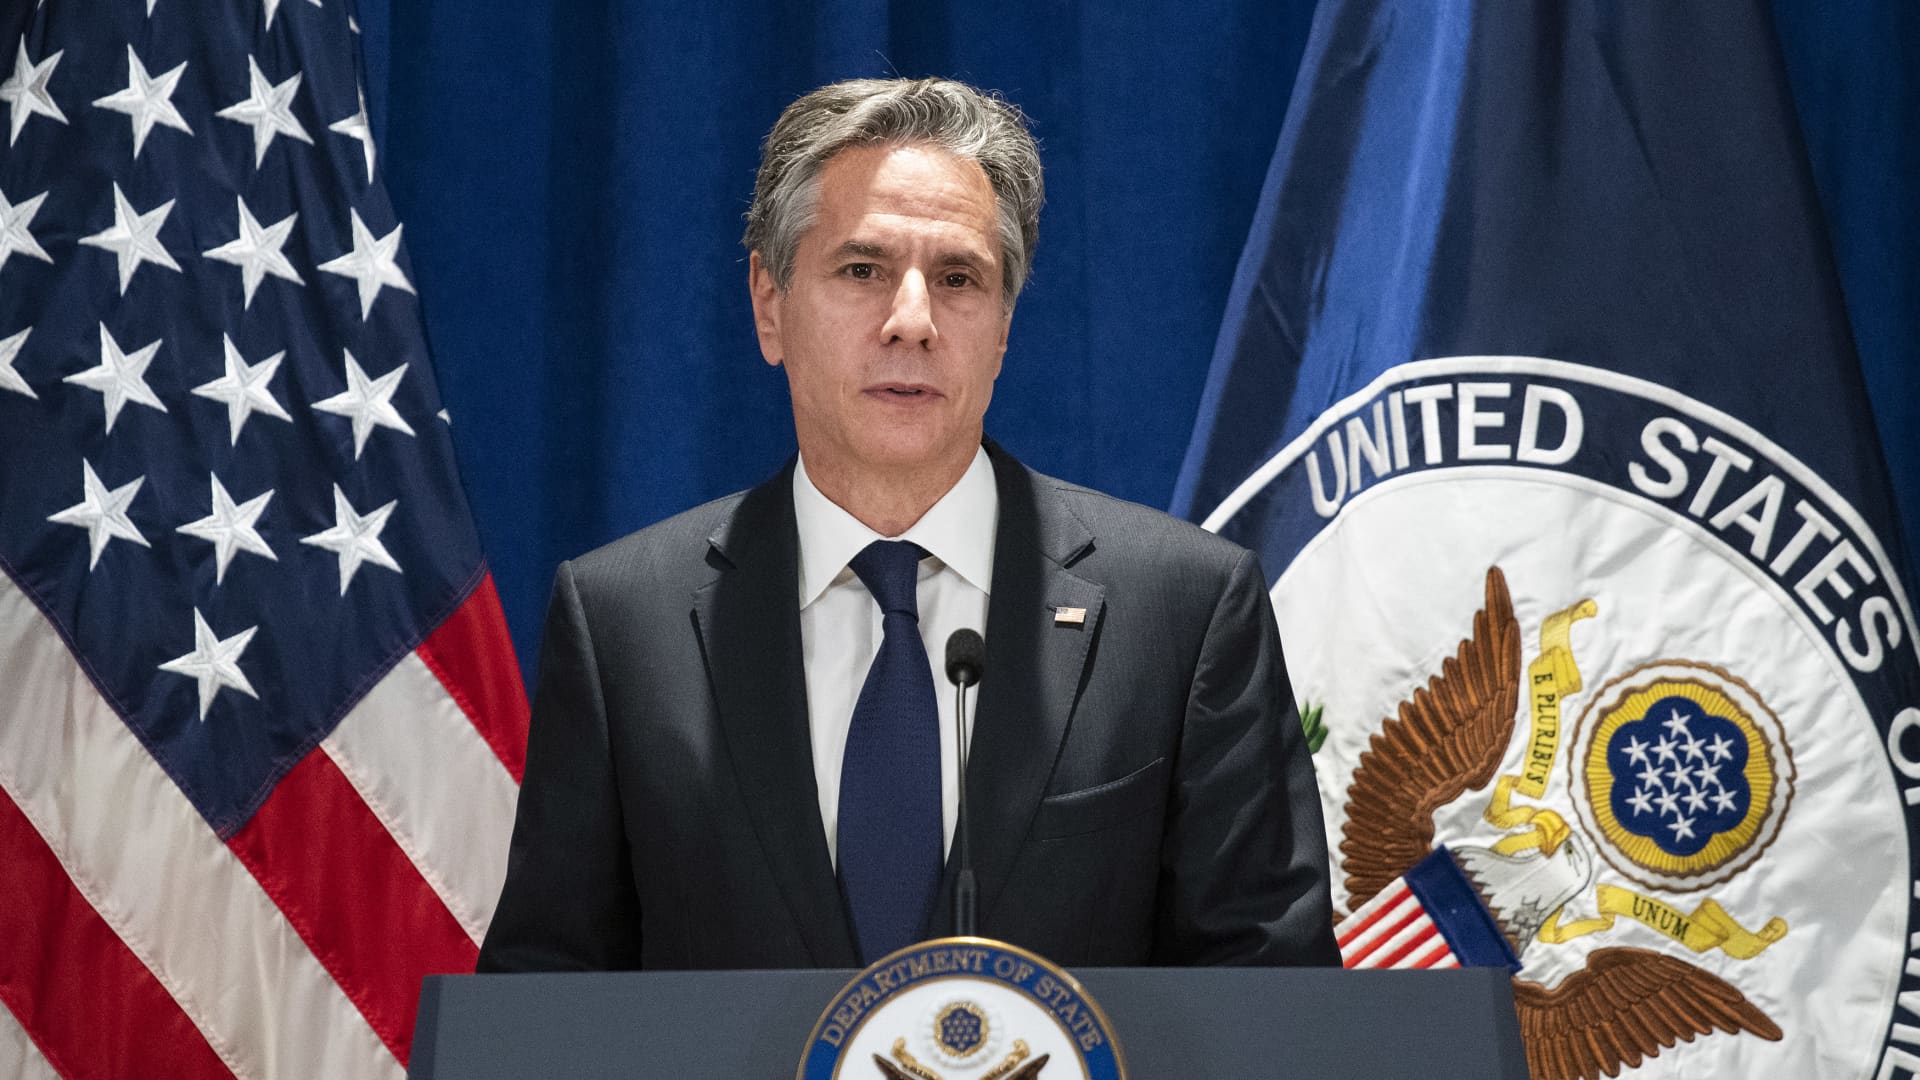 US Secretary of State Antony Blinken speaks to the media after meetings on the sidelines of the 76th Session of the UN General Assembly in New York, on September 23, 2021.